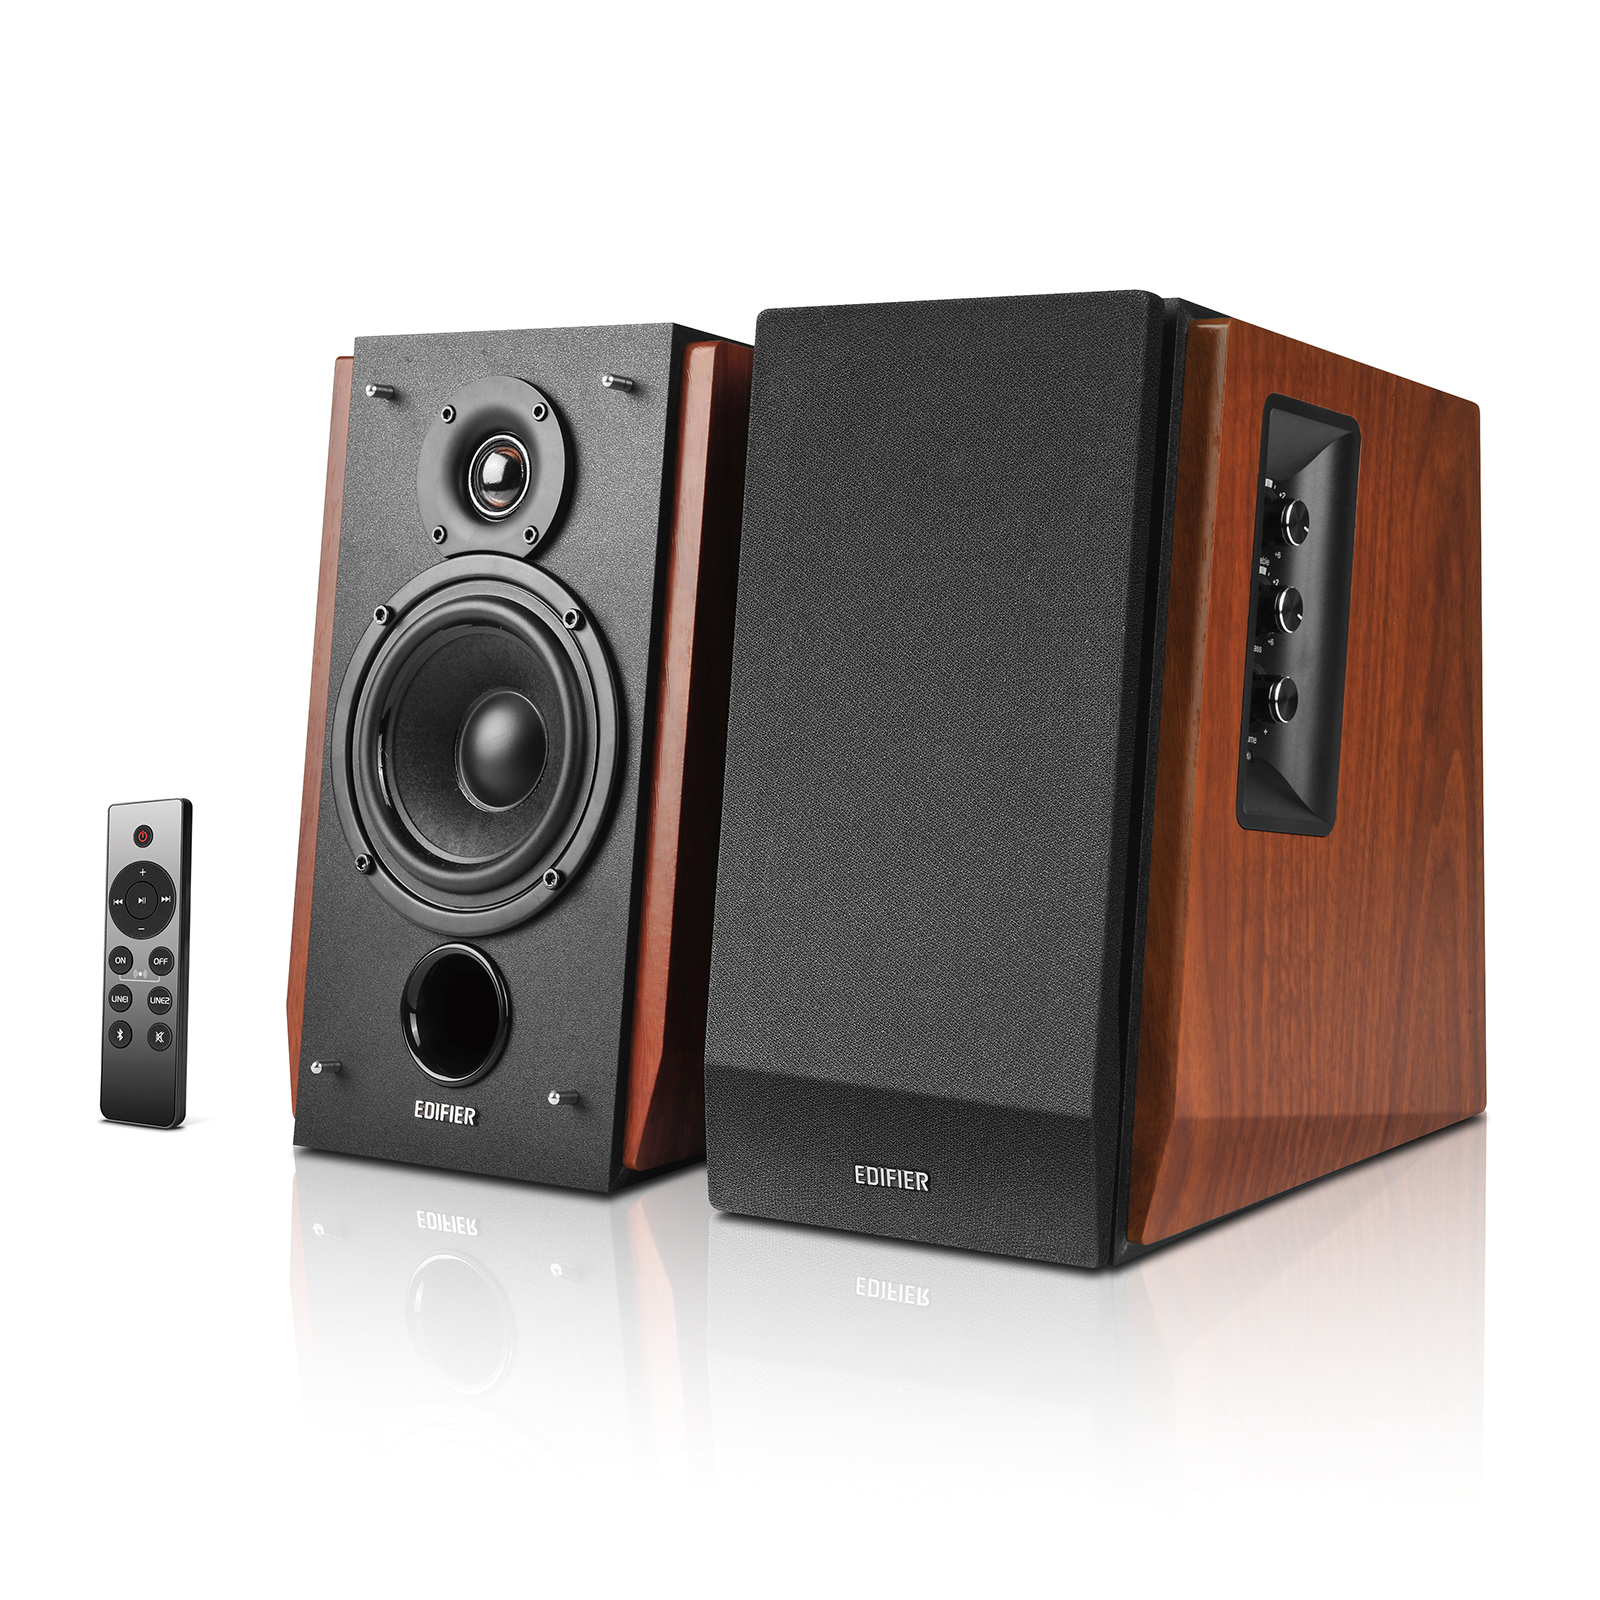 Edifier R1700BTs Active Bookshelf Speakers - Bluetooth v5.0, 2.0 Wireless Near Field Studio Monitor Speaker - 66w RMS with Subwoofer Line Out - Wooden Enclosure - image 1 of 7